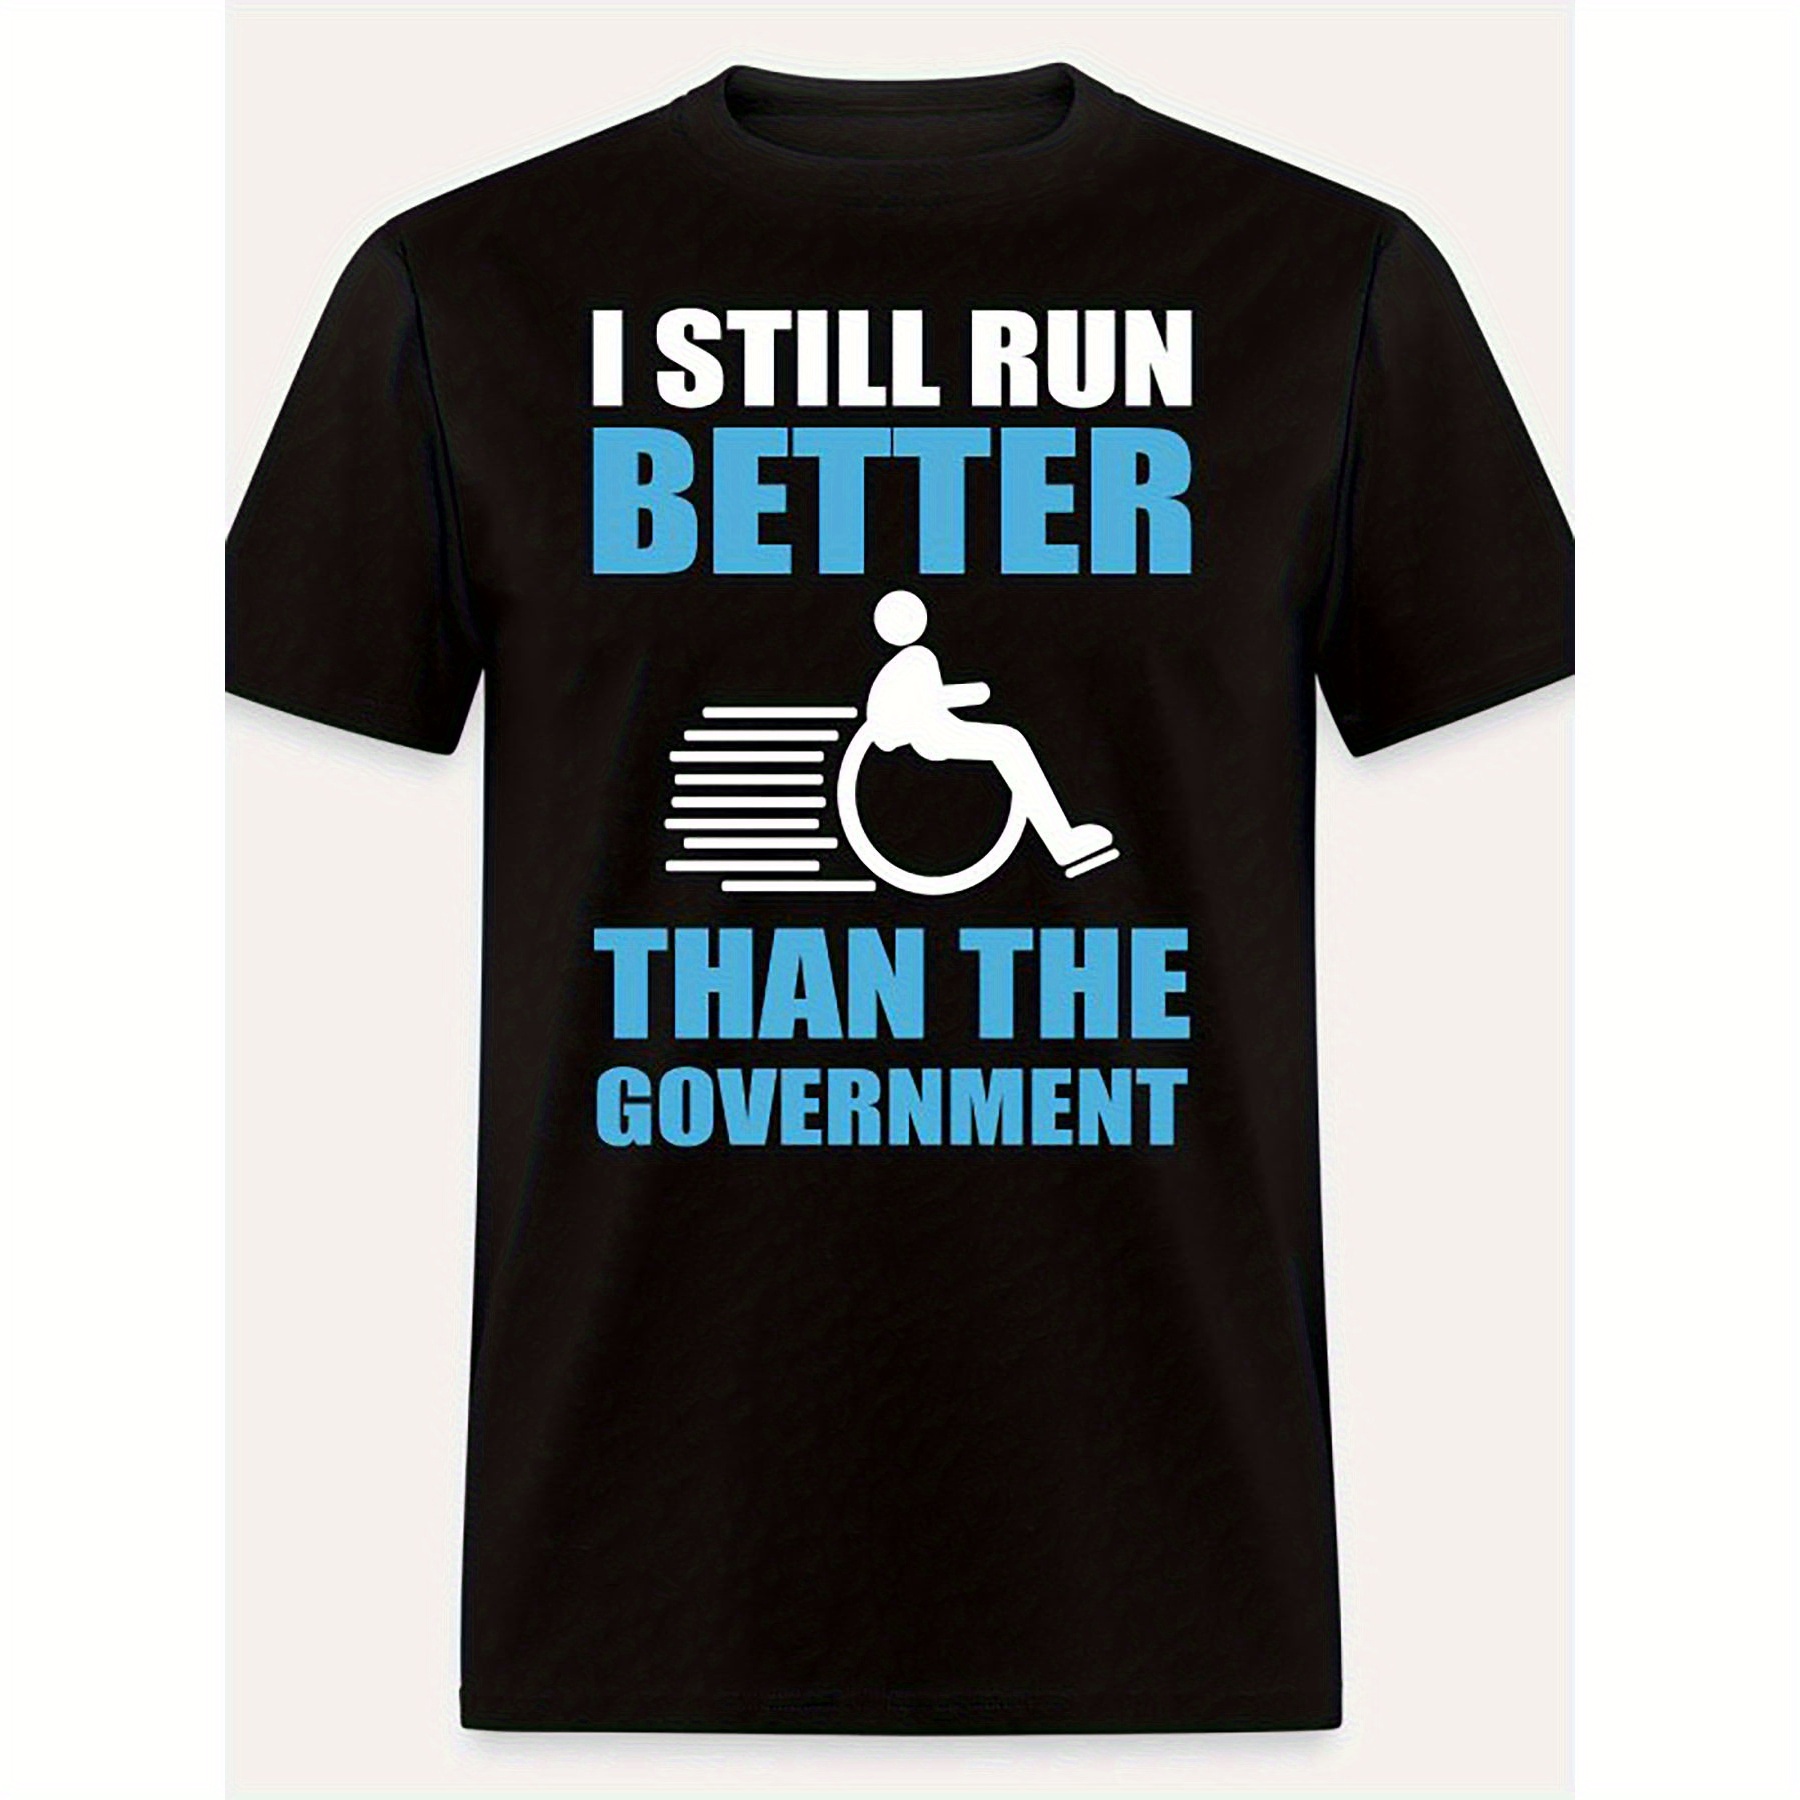 

Unique Handicap-6449 Collection Funny Government Satire Graphic Tee - Comfortable Mens Short Sleeve Relaxed Fit T-shirt With Sarcastic I Still Run Better Than The Government Slogan In Deep Black Color